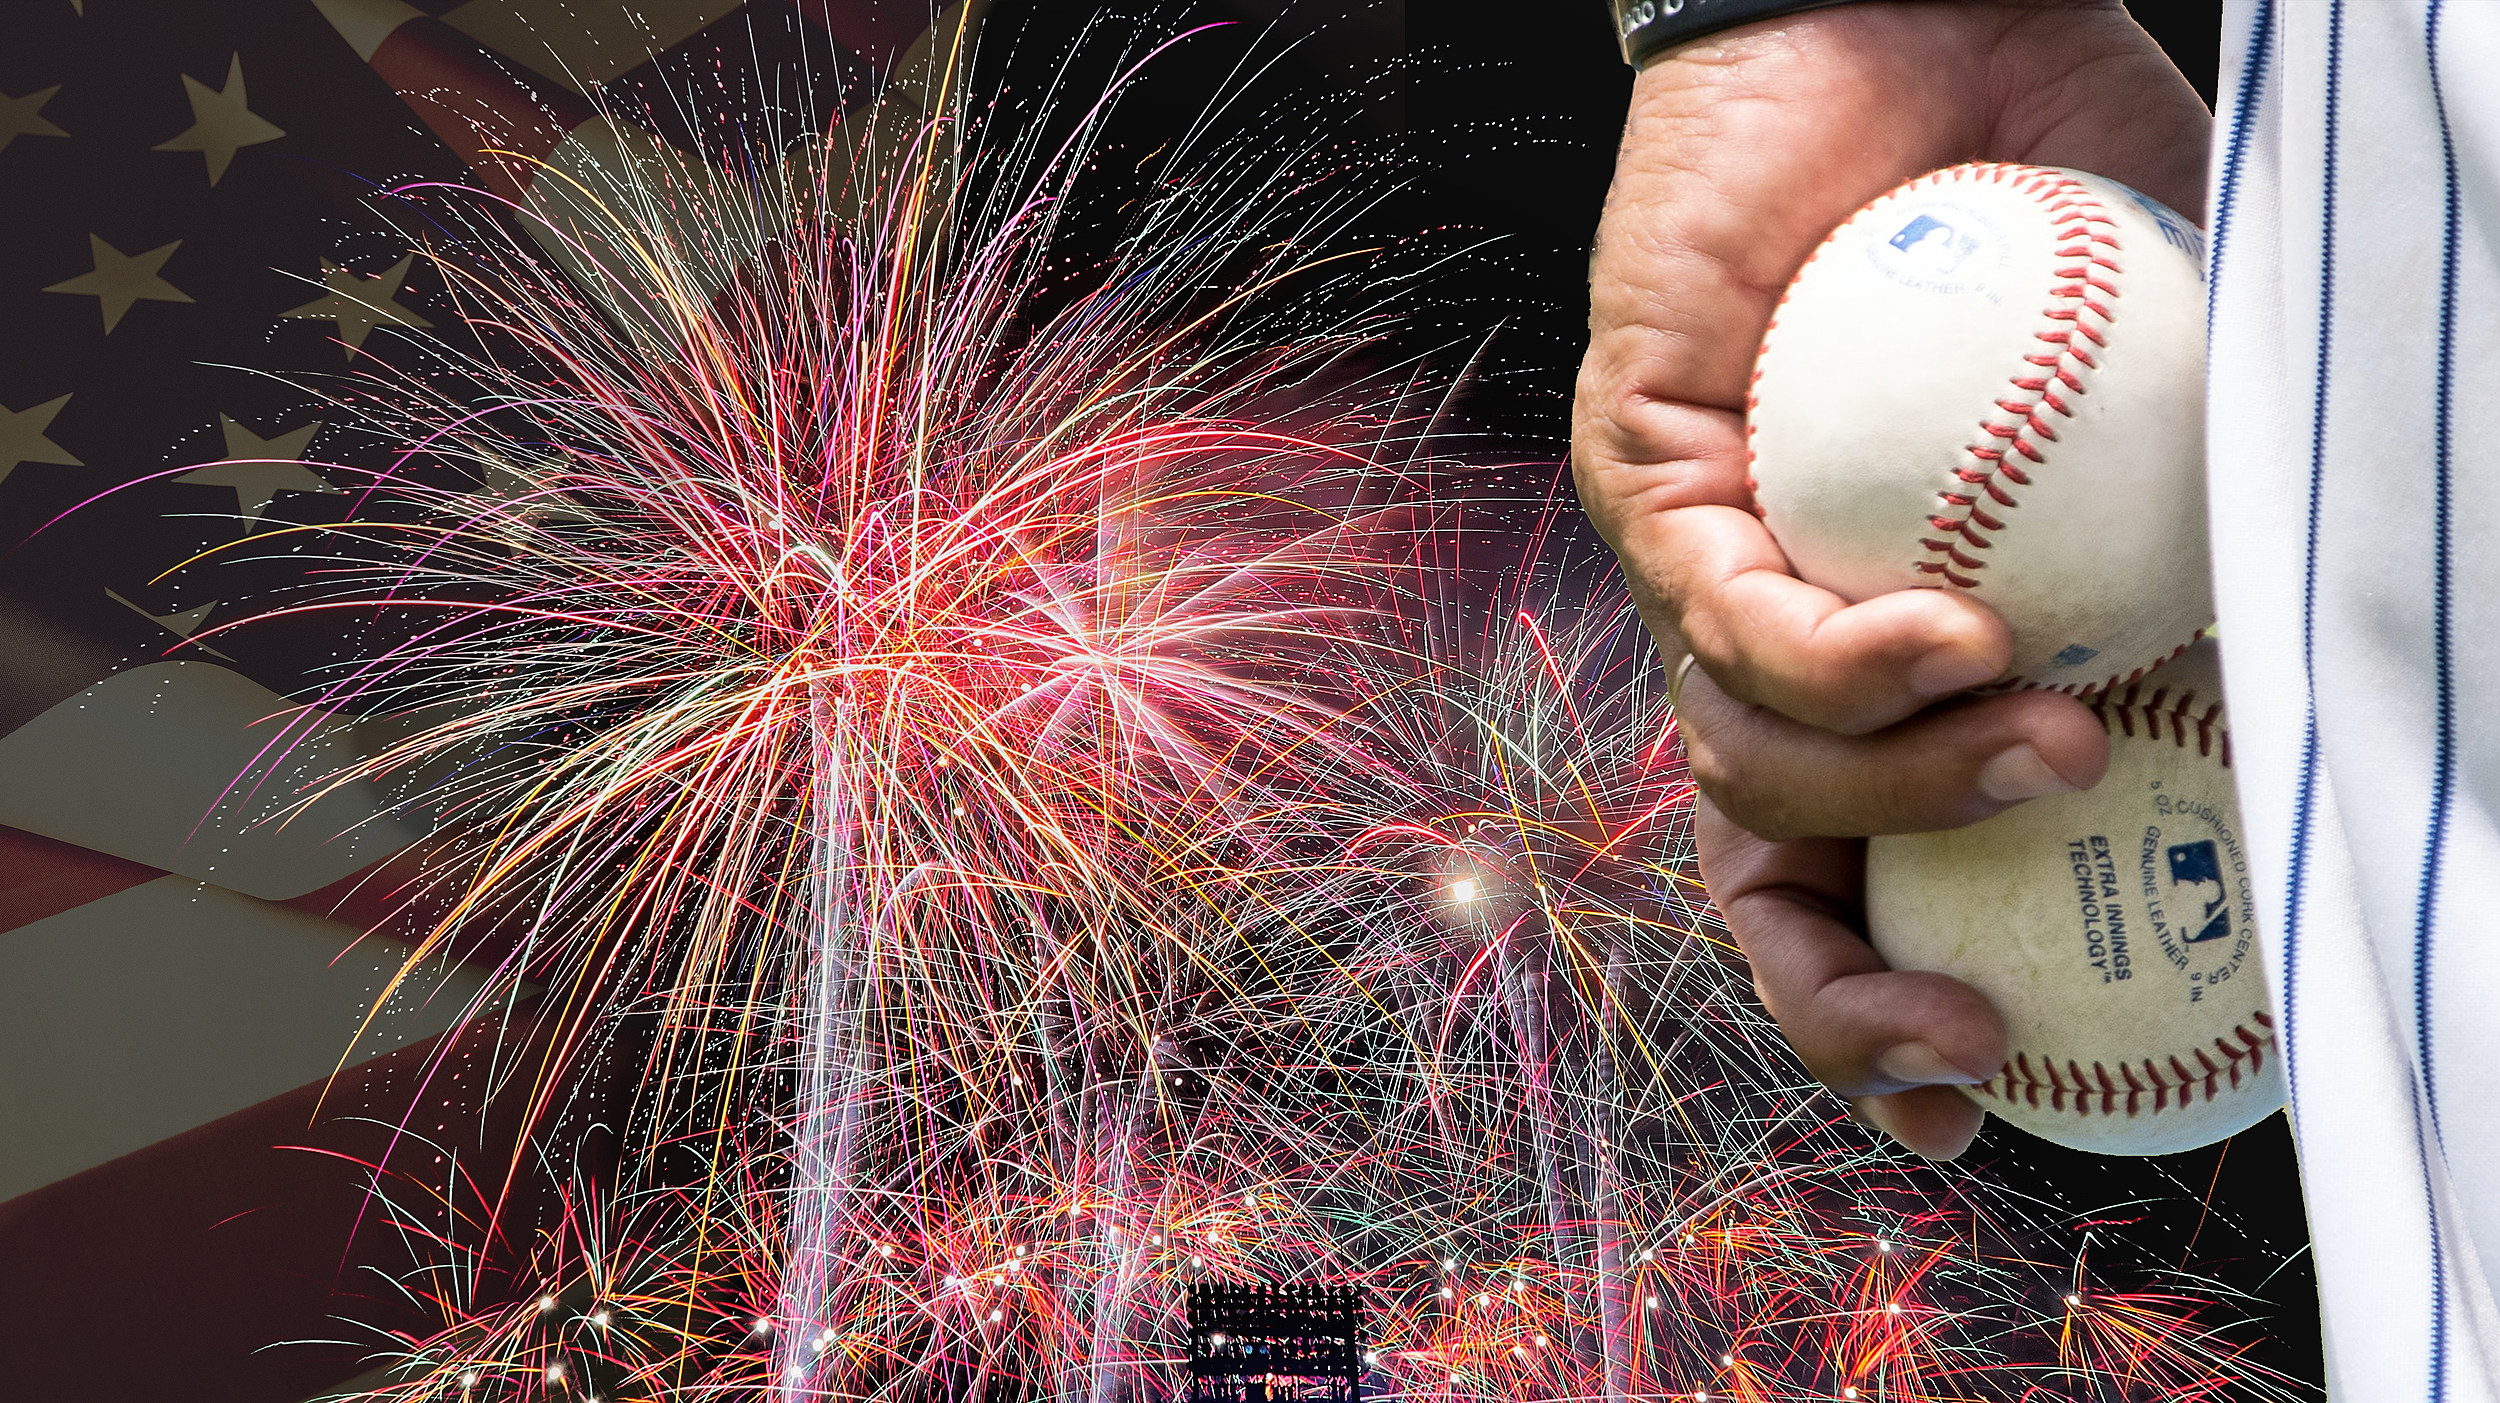 Baseball, Hot Dogs, and Fireworks. The Ultimate Boise 4th of July